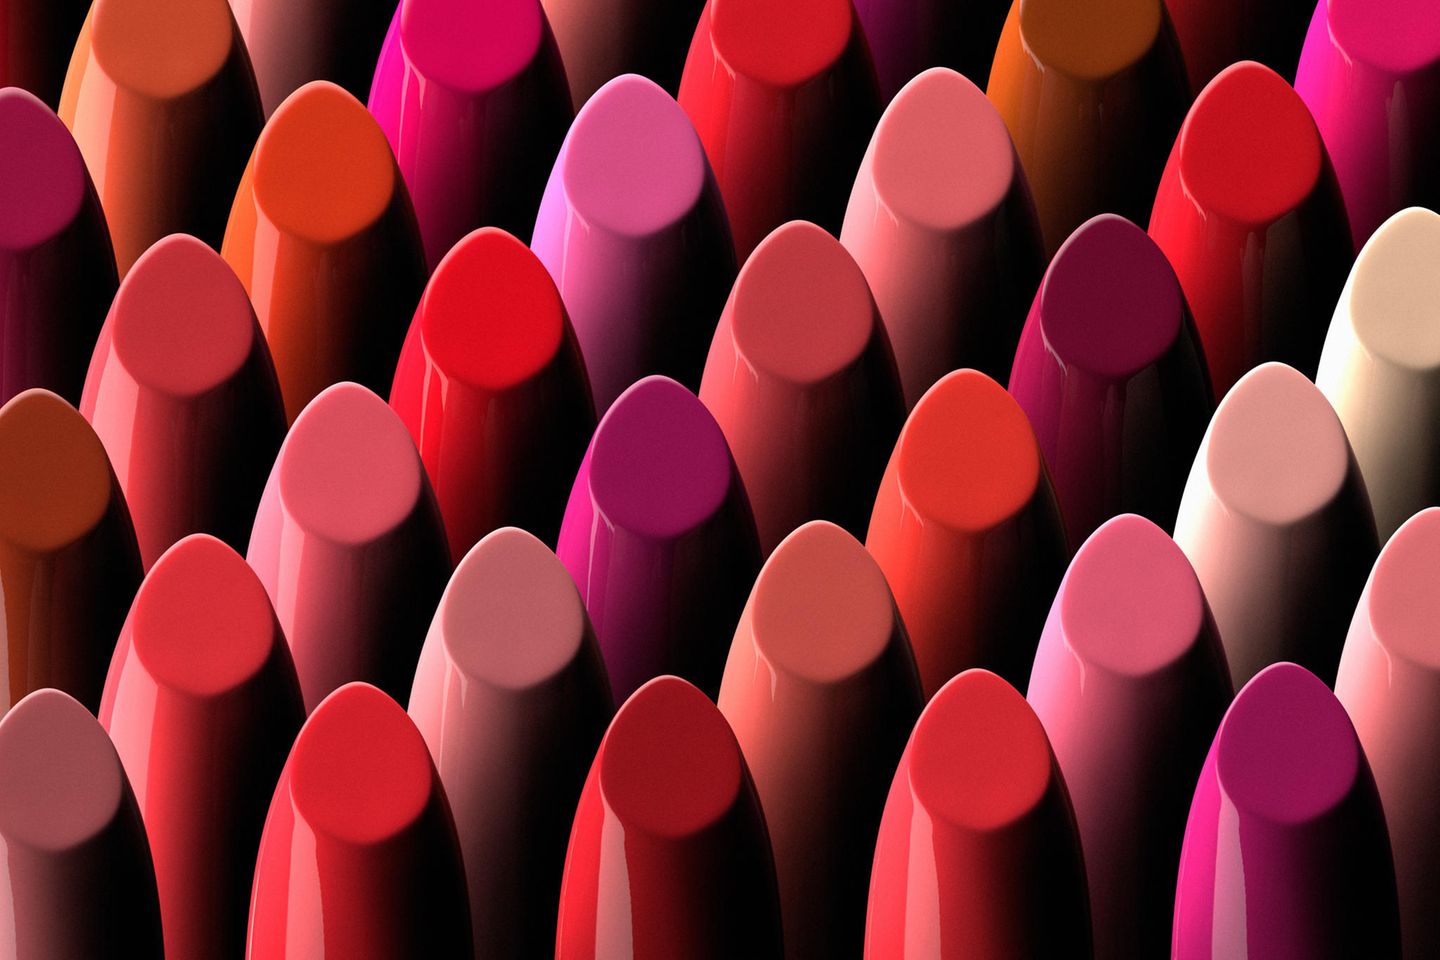 Long-lasting lipstick?: This trick should finally work - we tested it!